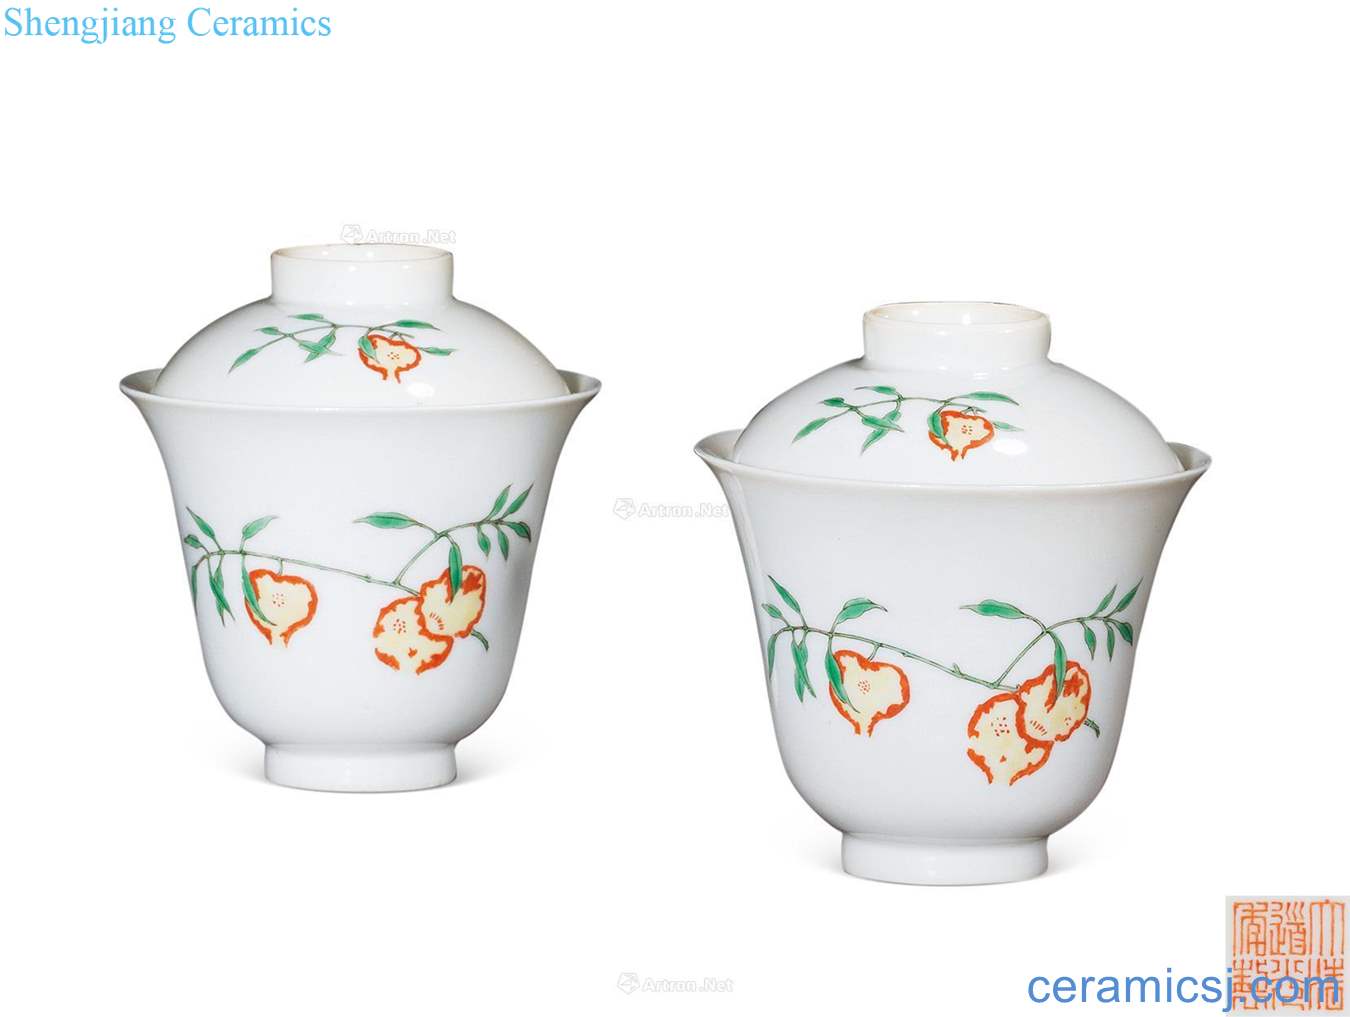 Qing daoguang Flowers and colorful folding branches lines cover cup (a)